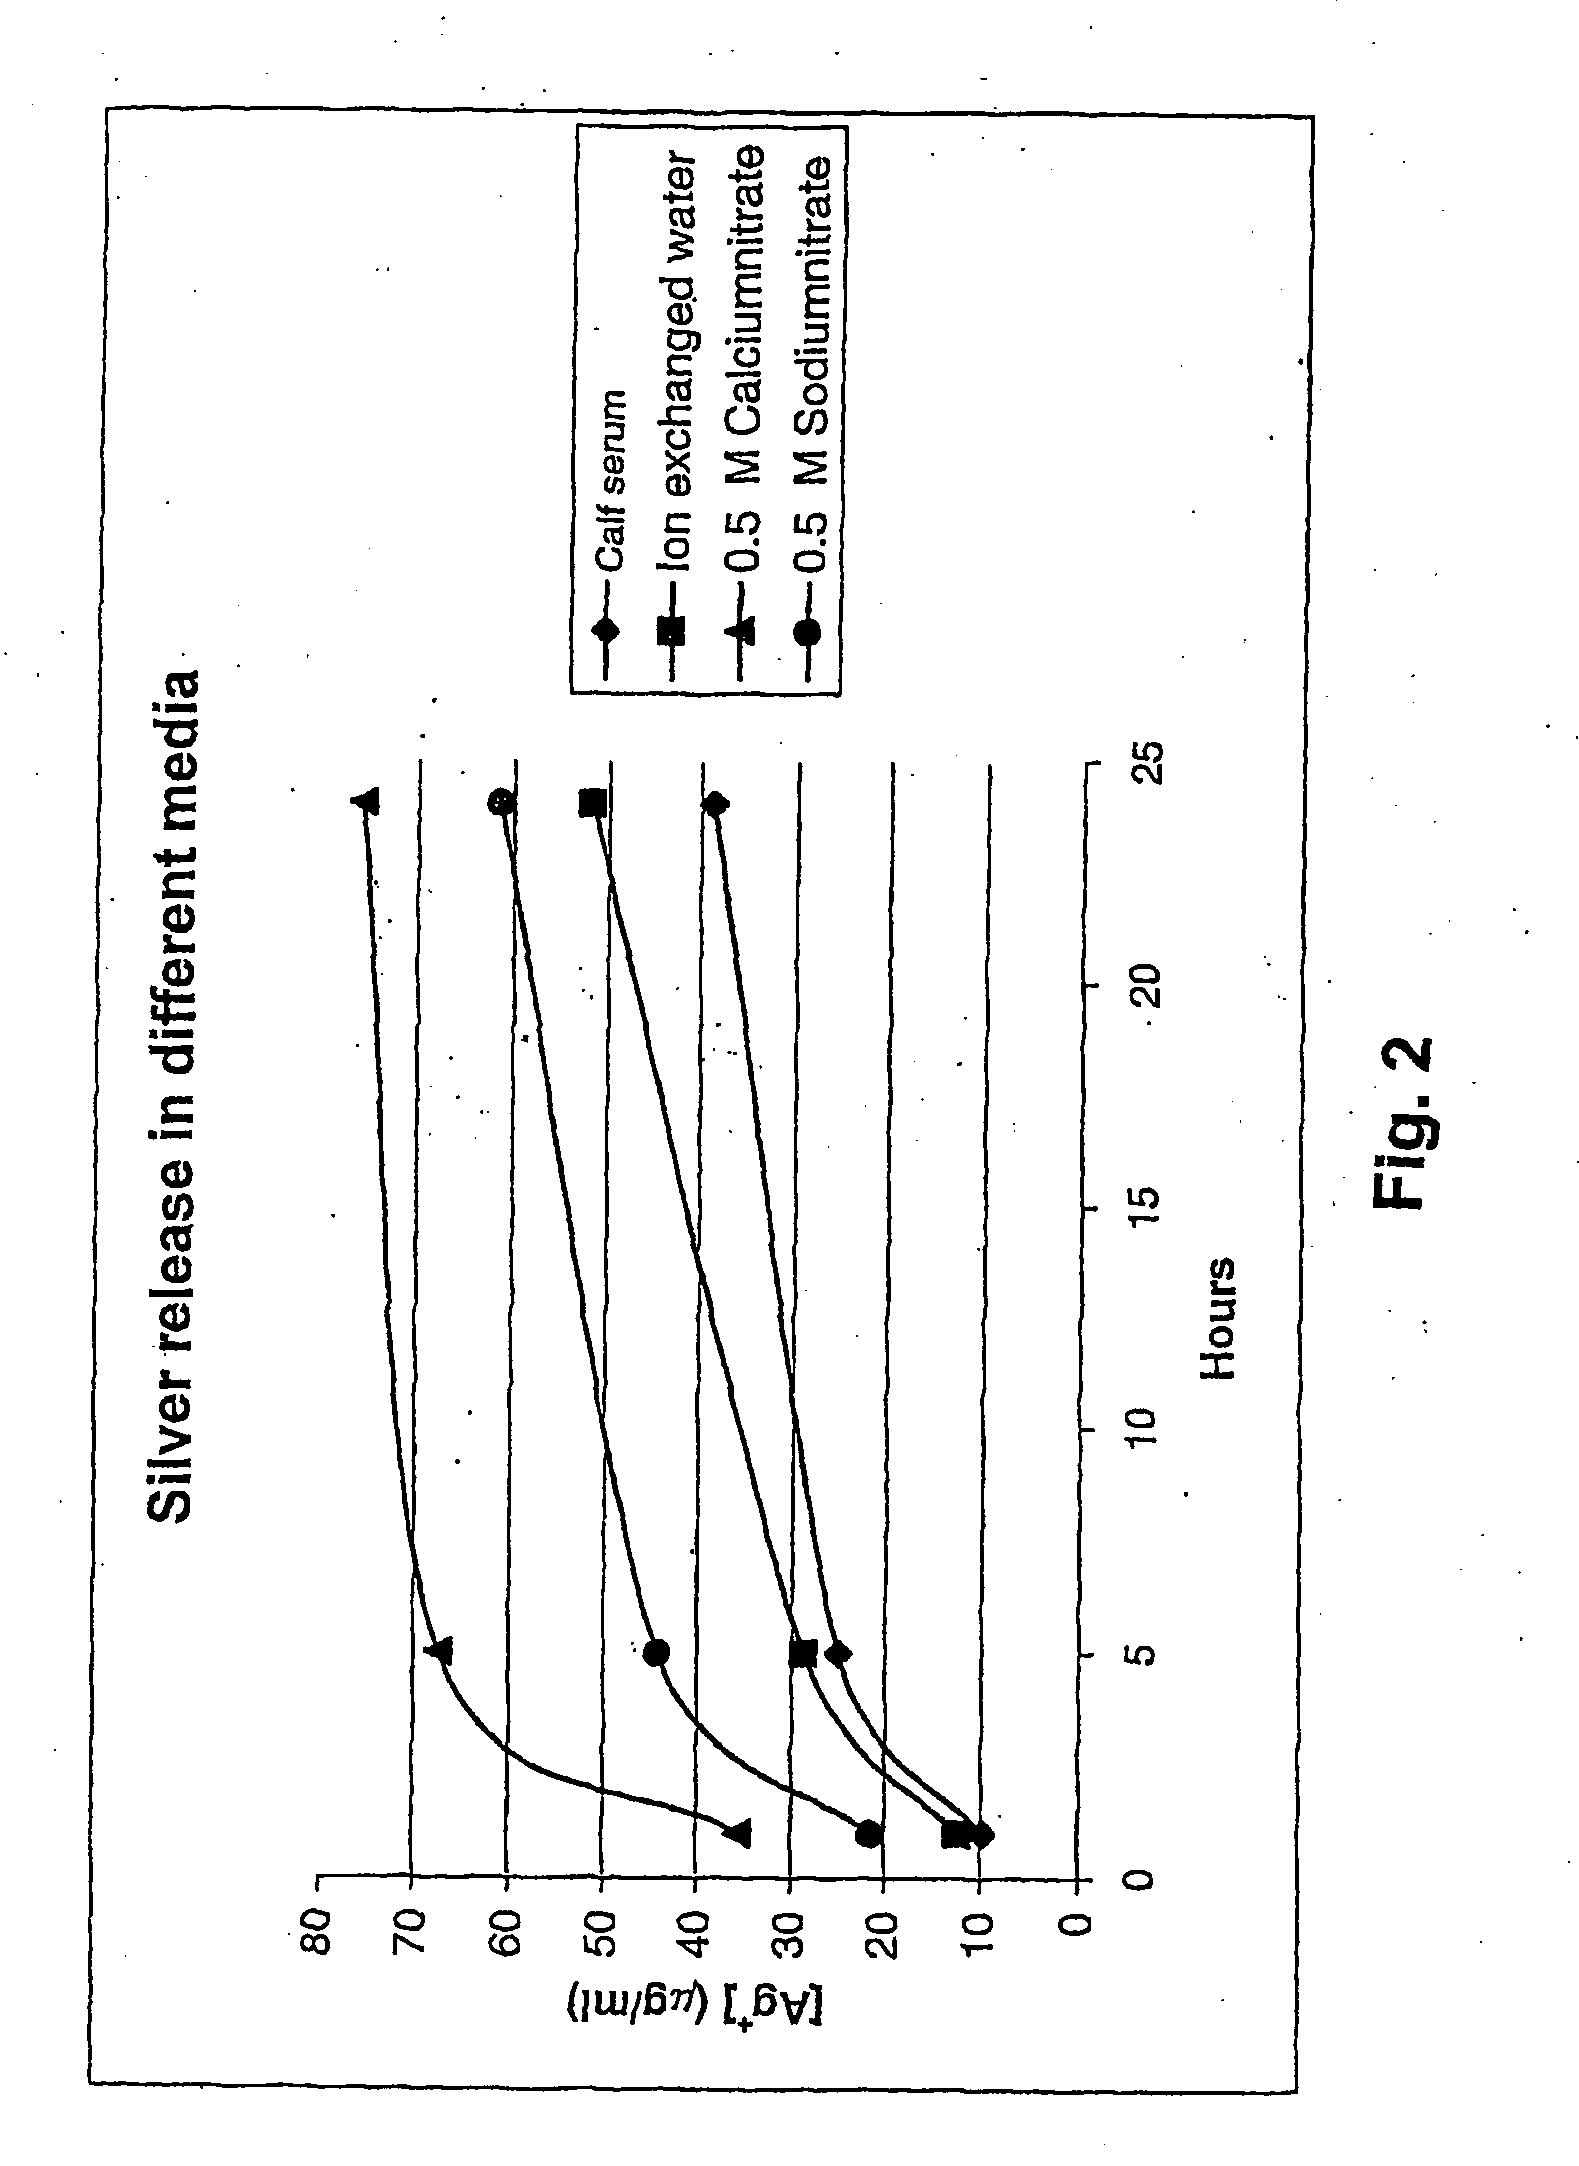 Medical dressing comprising an antimicrobial silver compound